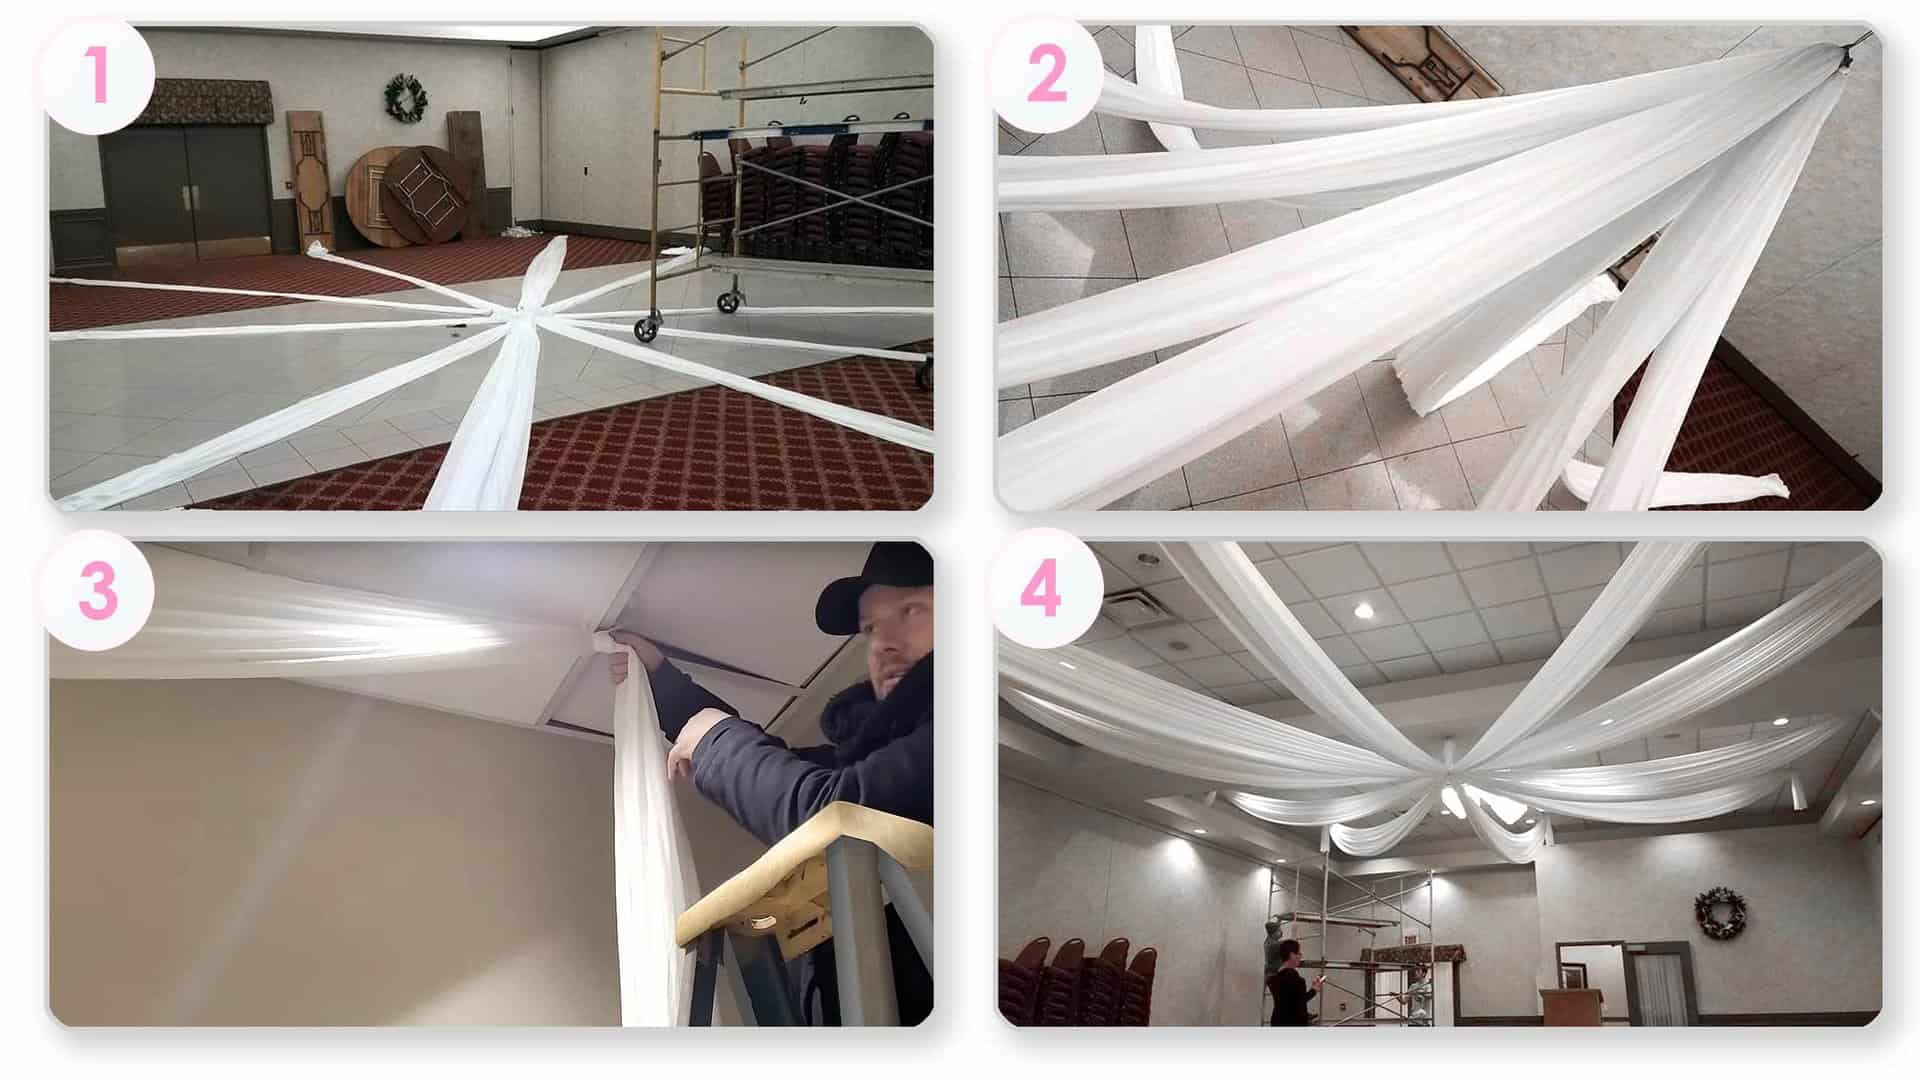 https://shipour.wedding/wp-content/uploads/2017/10/how_to_setup_ceiling_draping.jpg